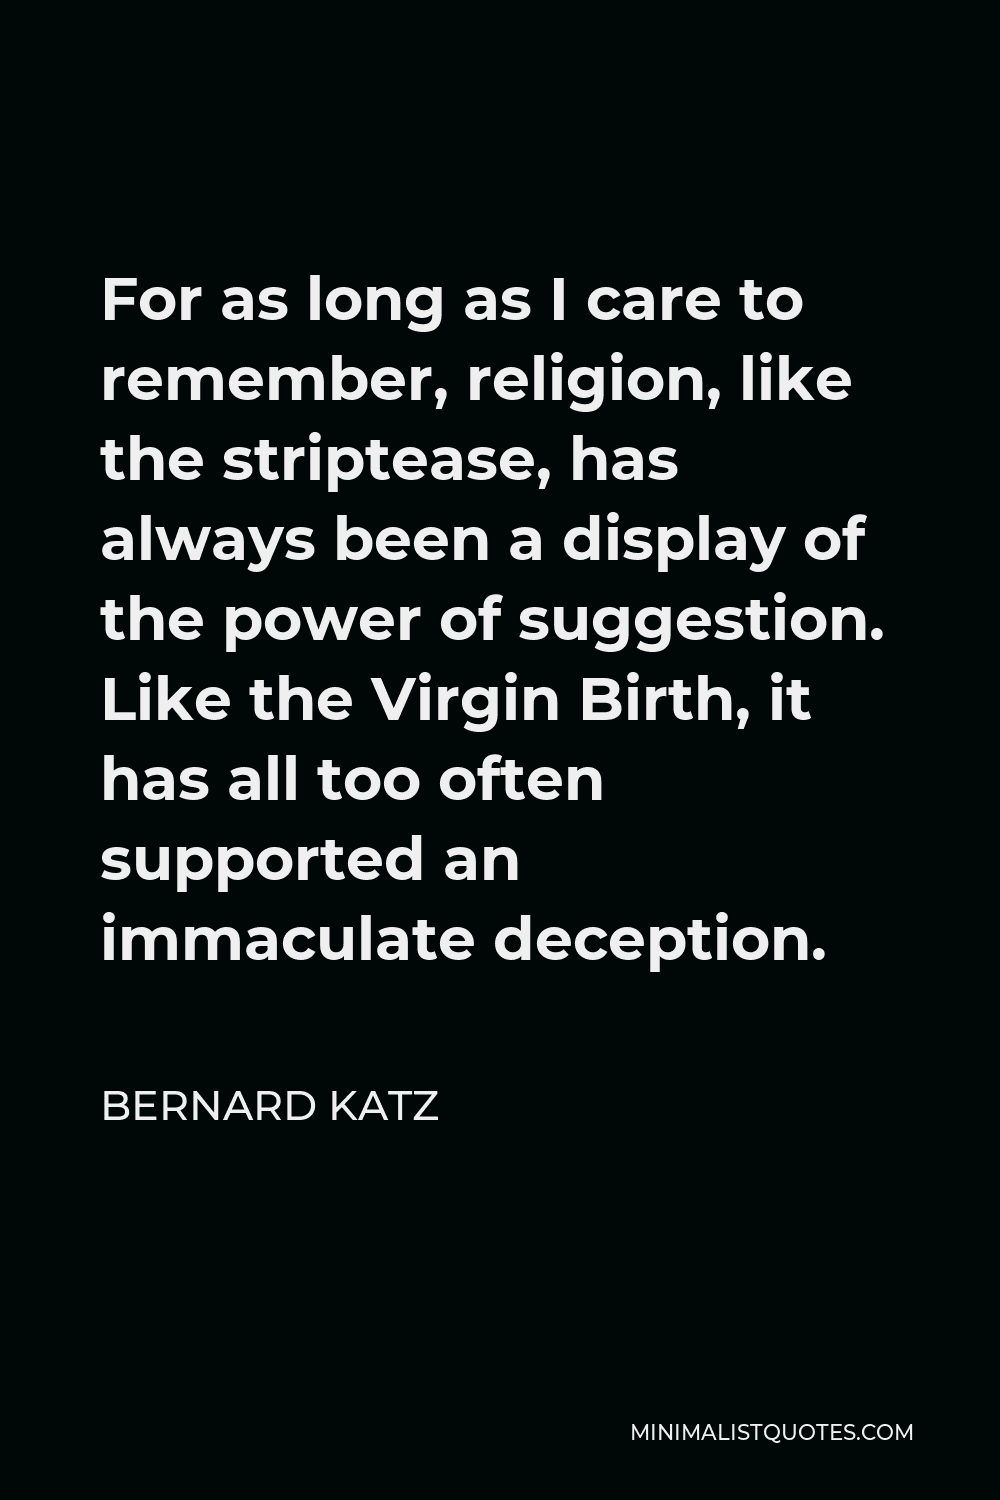 Bernard Katz Quote - For as long as I care to remember, religion, like the striptease, has always been a display of the power of suggestion. Like the Virgin Birth, it has all too often supported an immaculate deception.